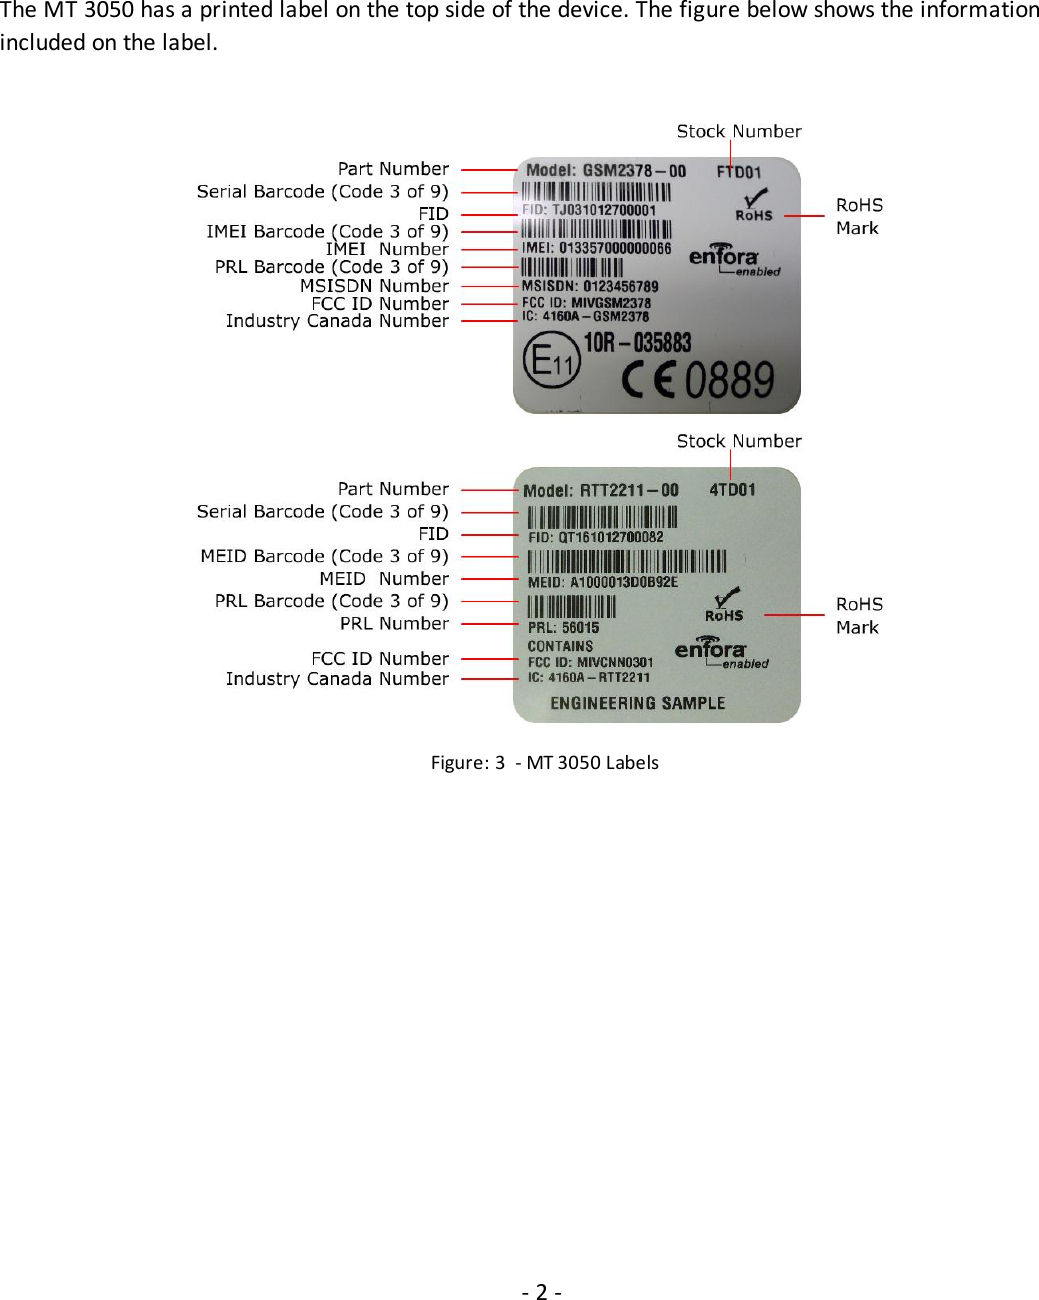 - 2 -The MT 3050 has a printed label on the top side of the device. The figure below shows the informationincluded on the label.Figure: 3 - MT 3050 Labels